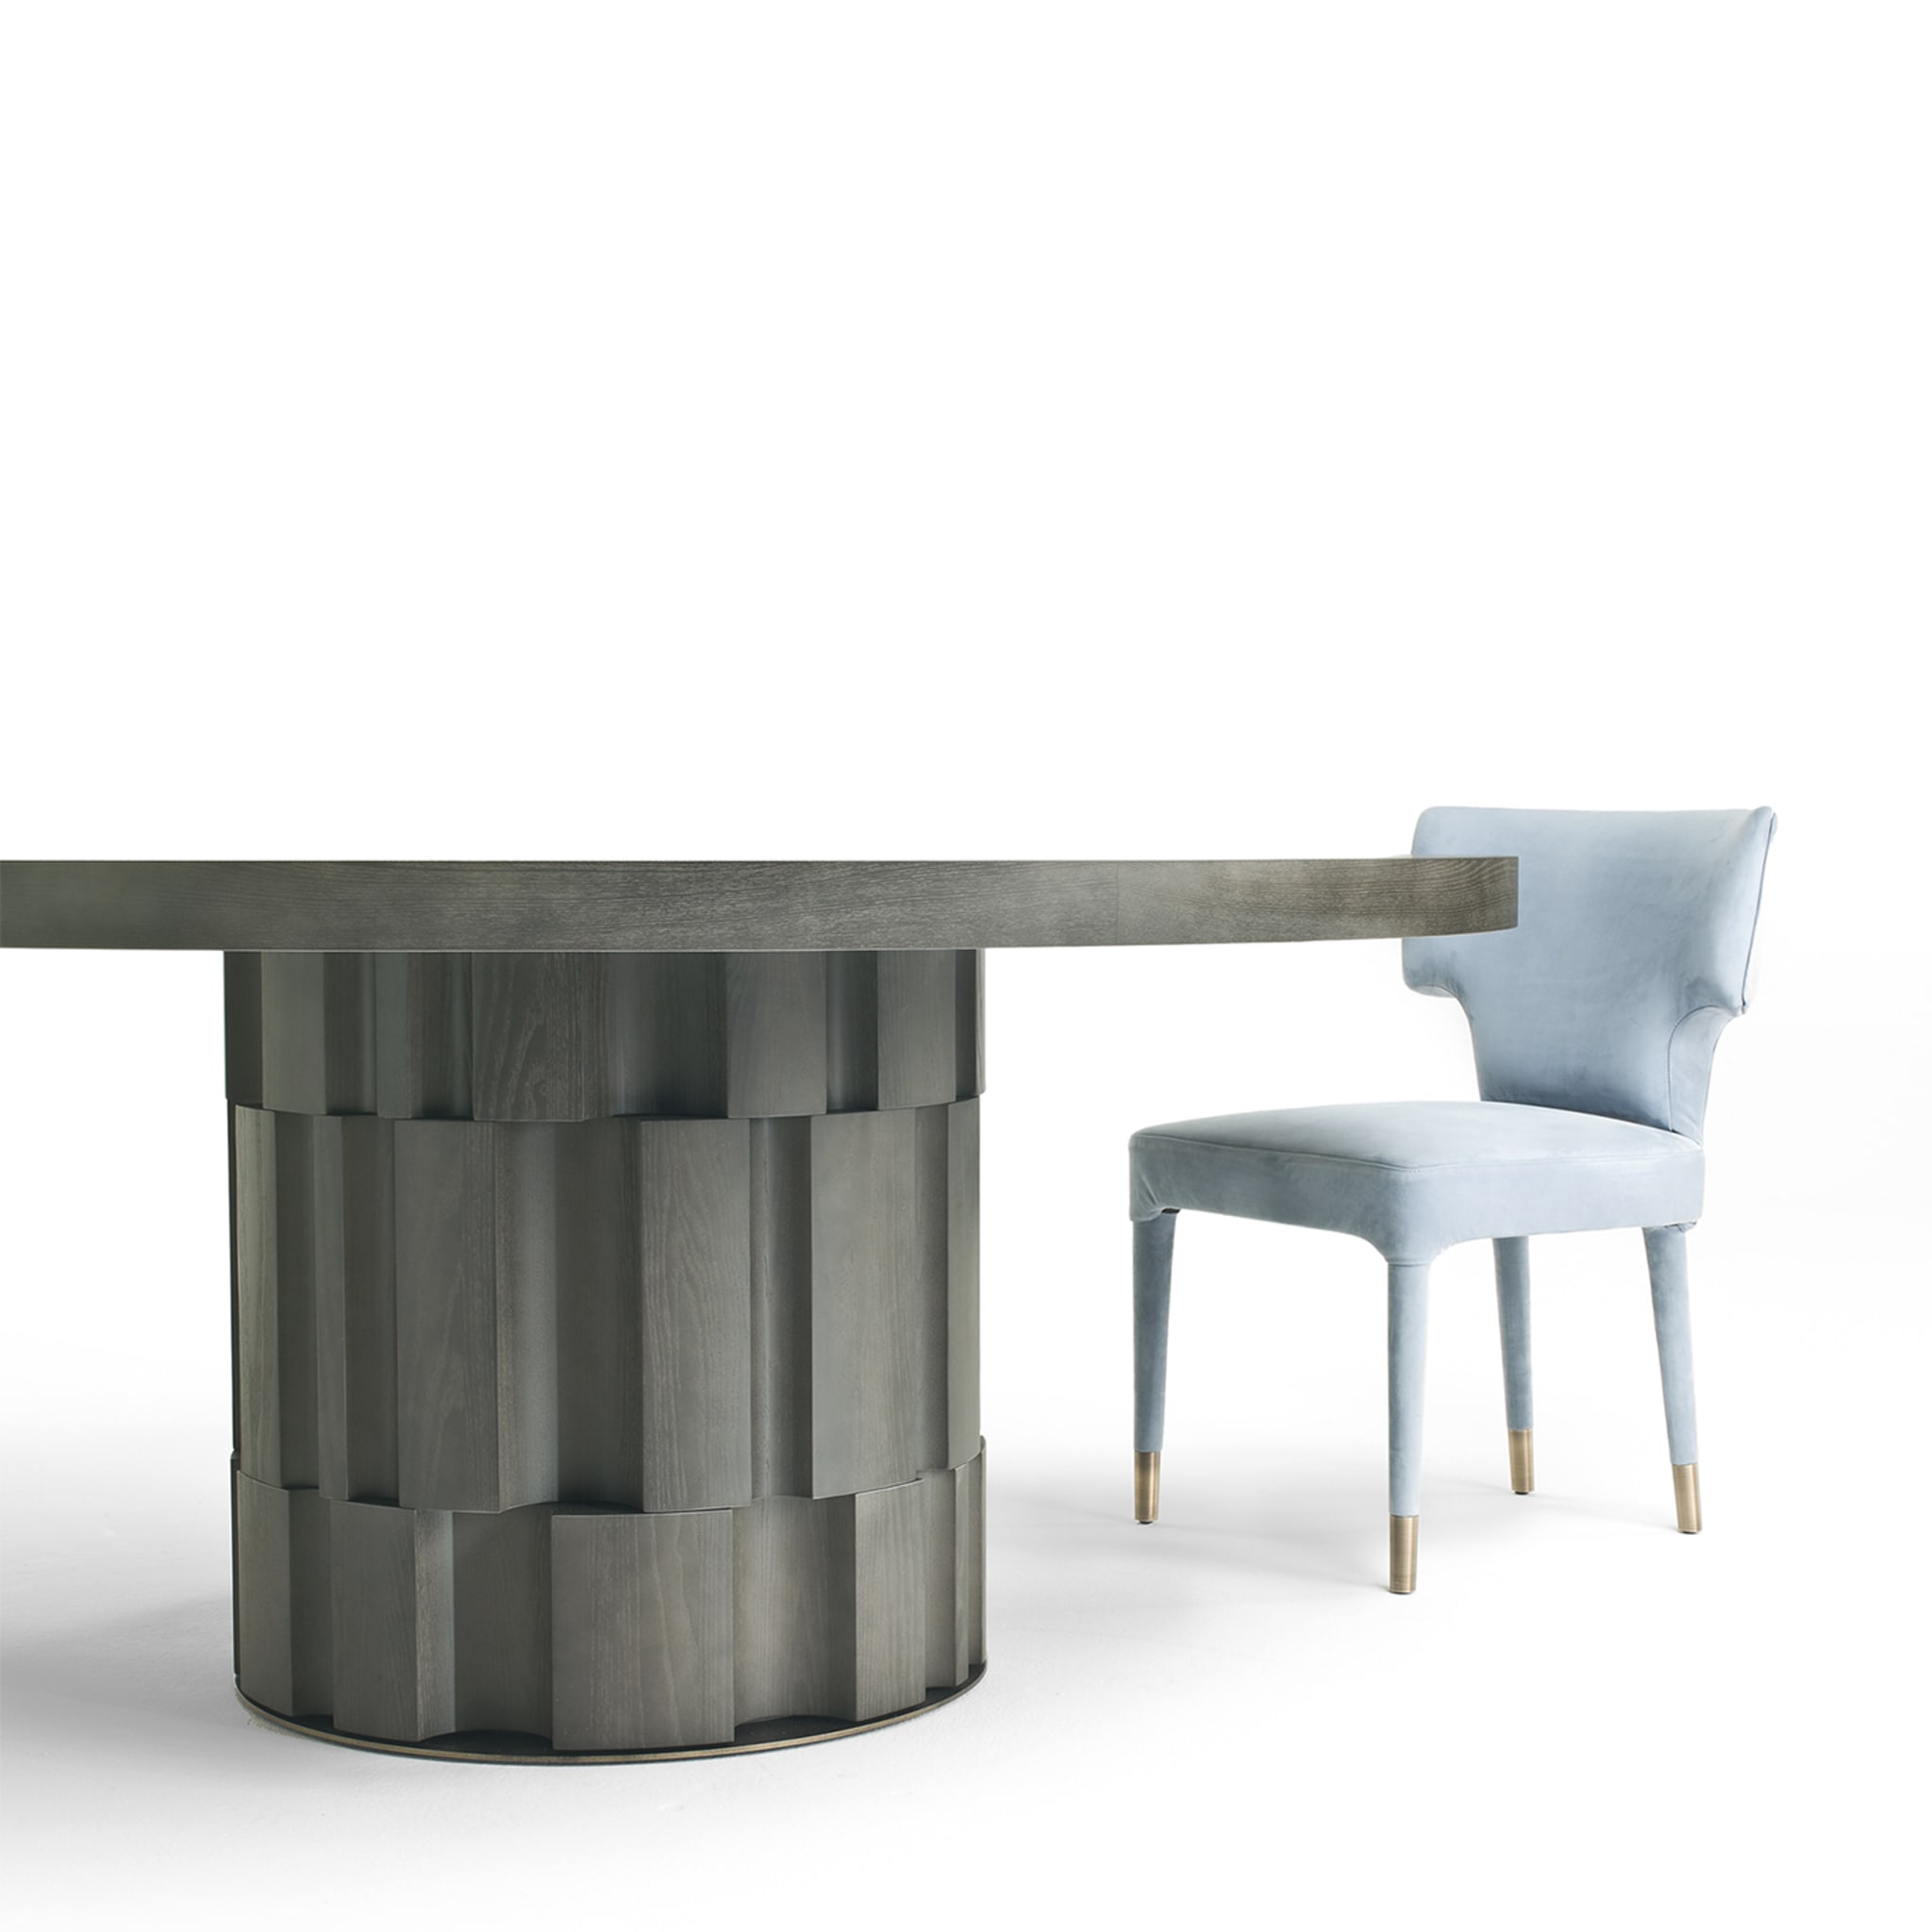 Atmos Dining Table by Dainelli Studio - Alternative view 2